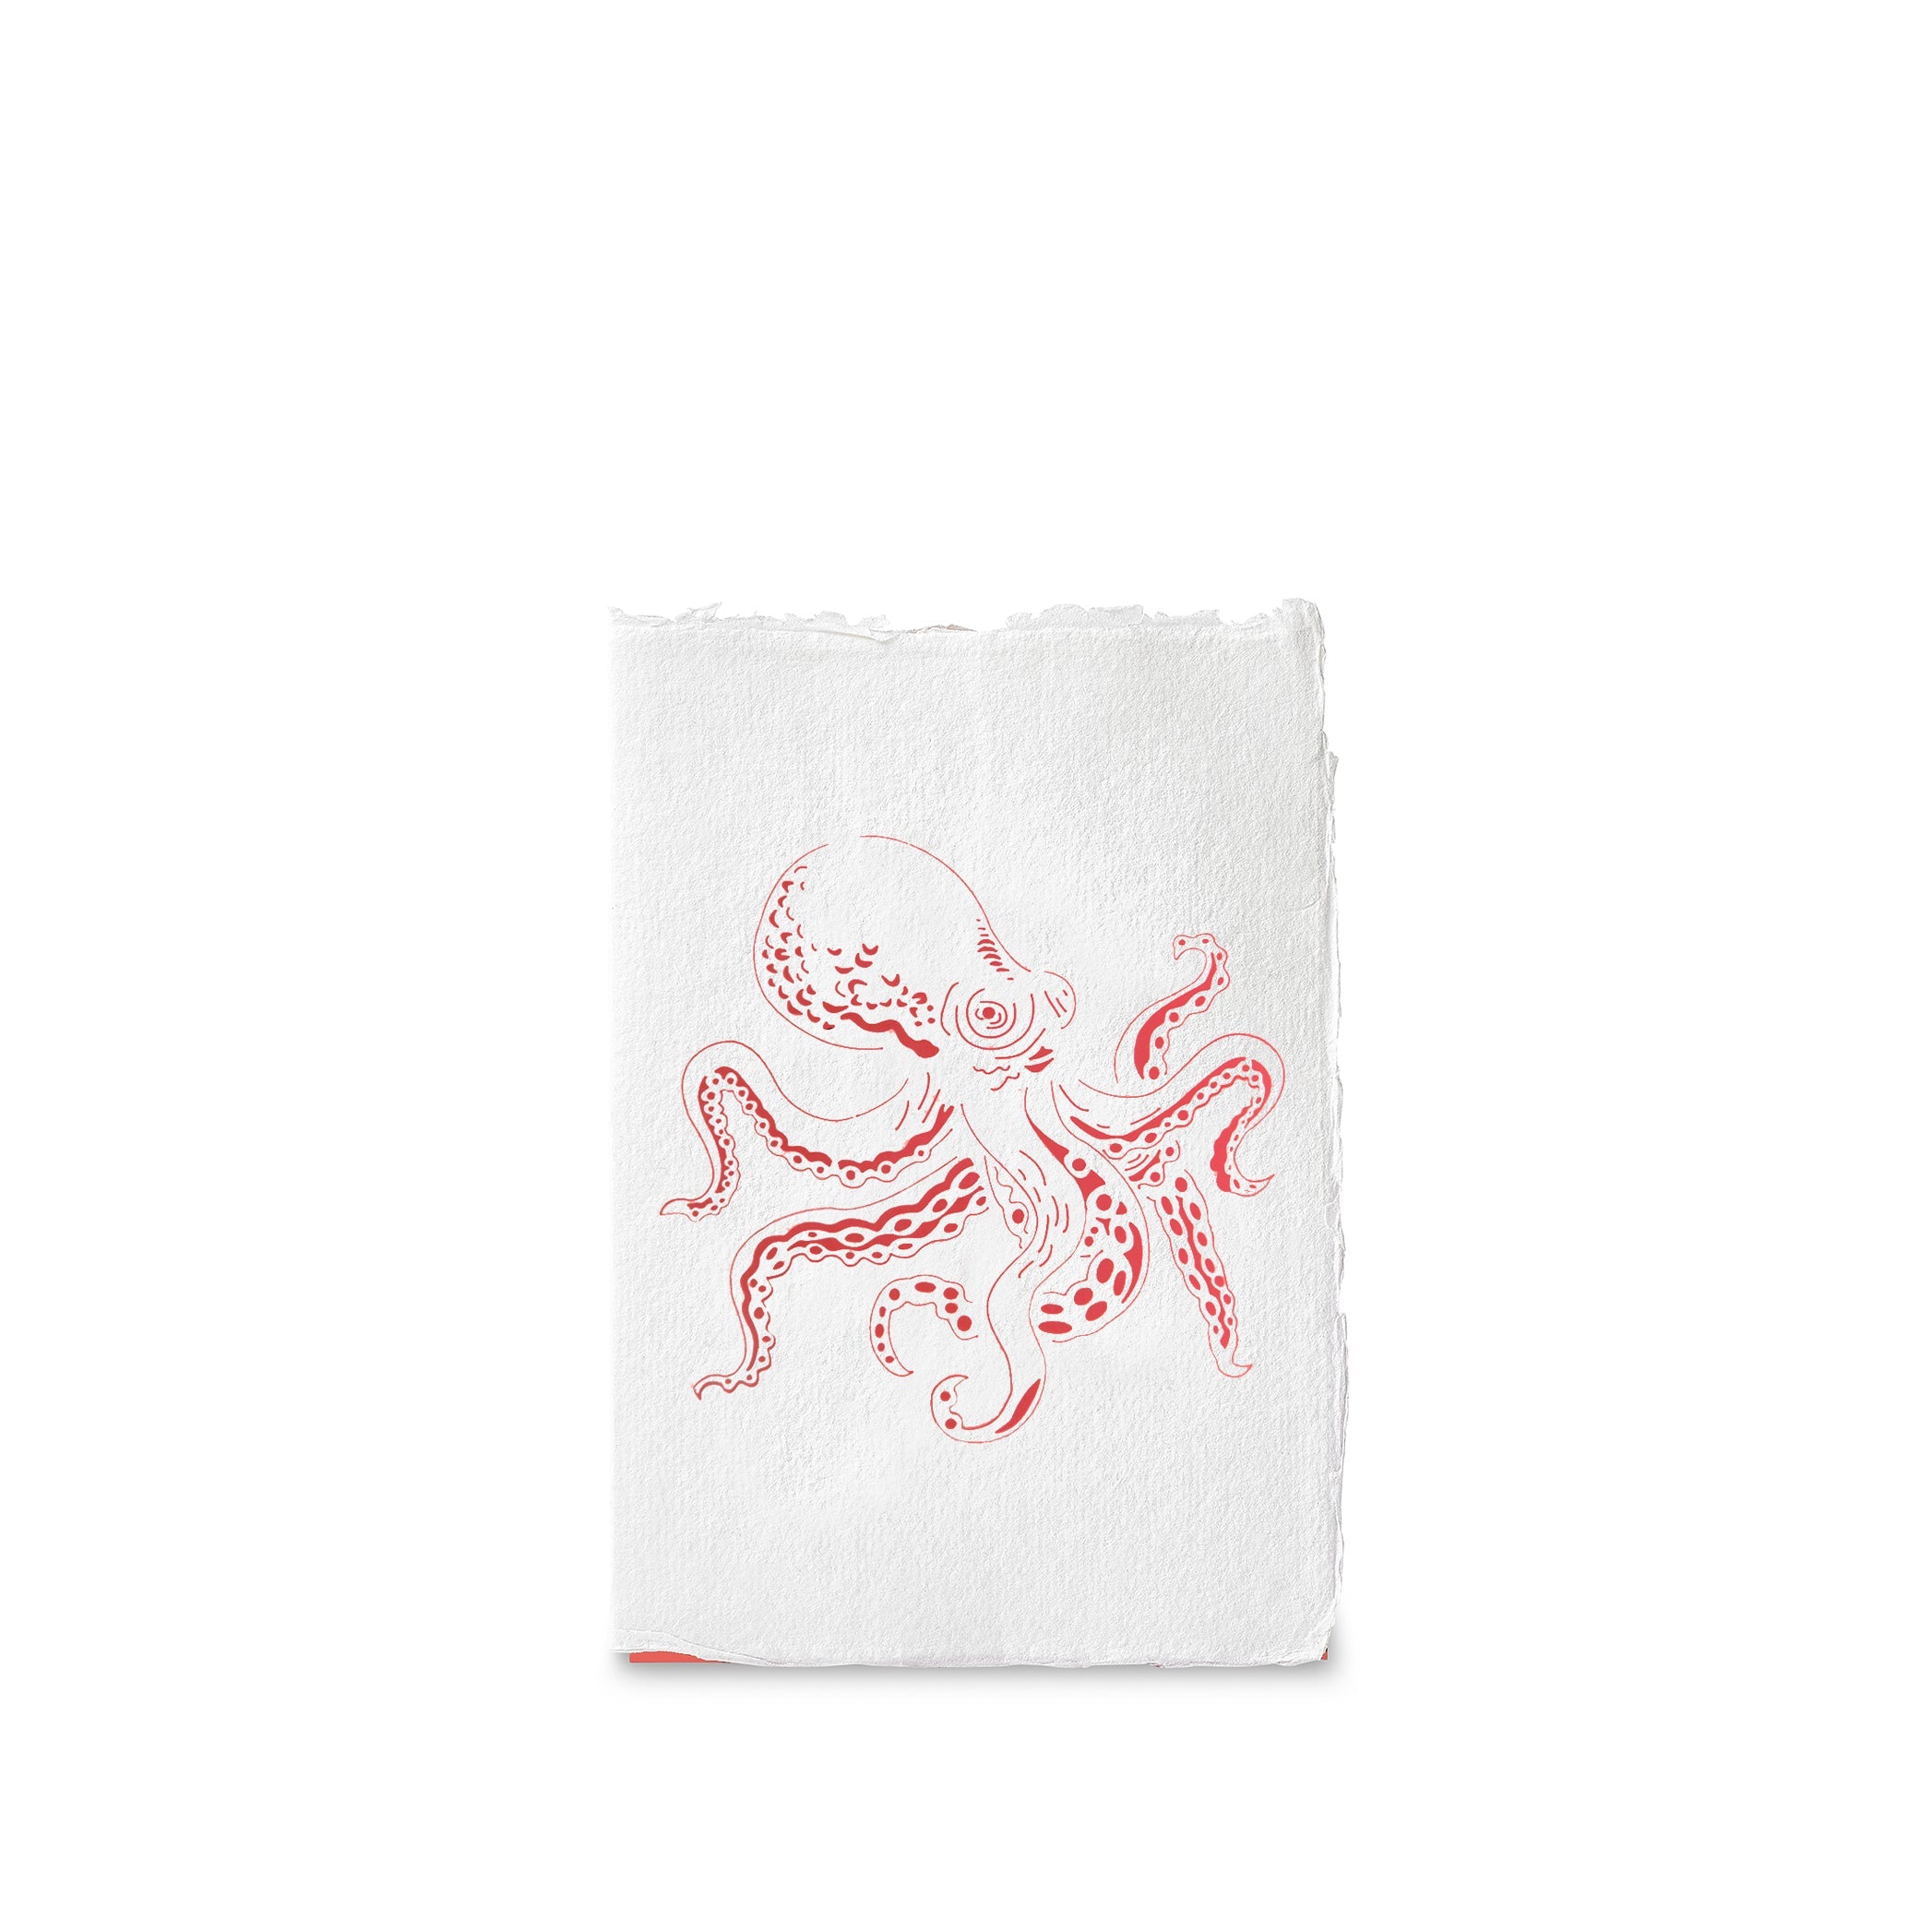 Handmade Paper Greeting Card with Octopus, 15cm x 10cm